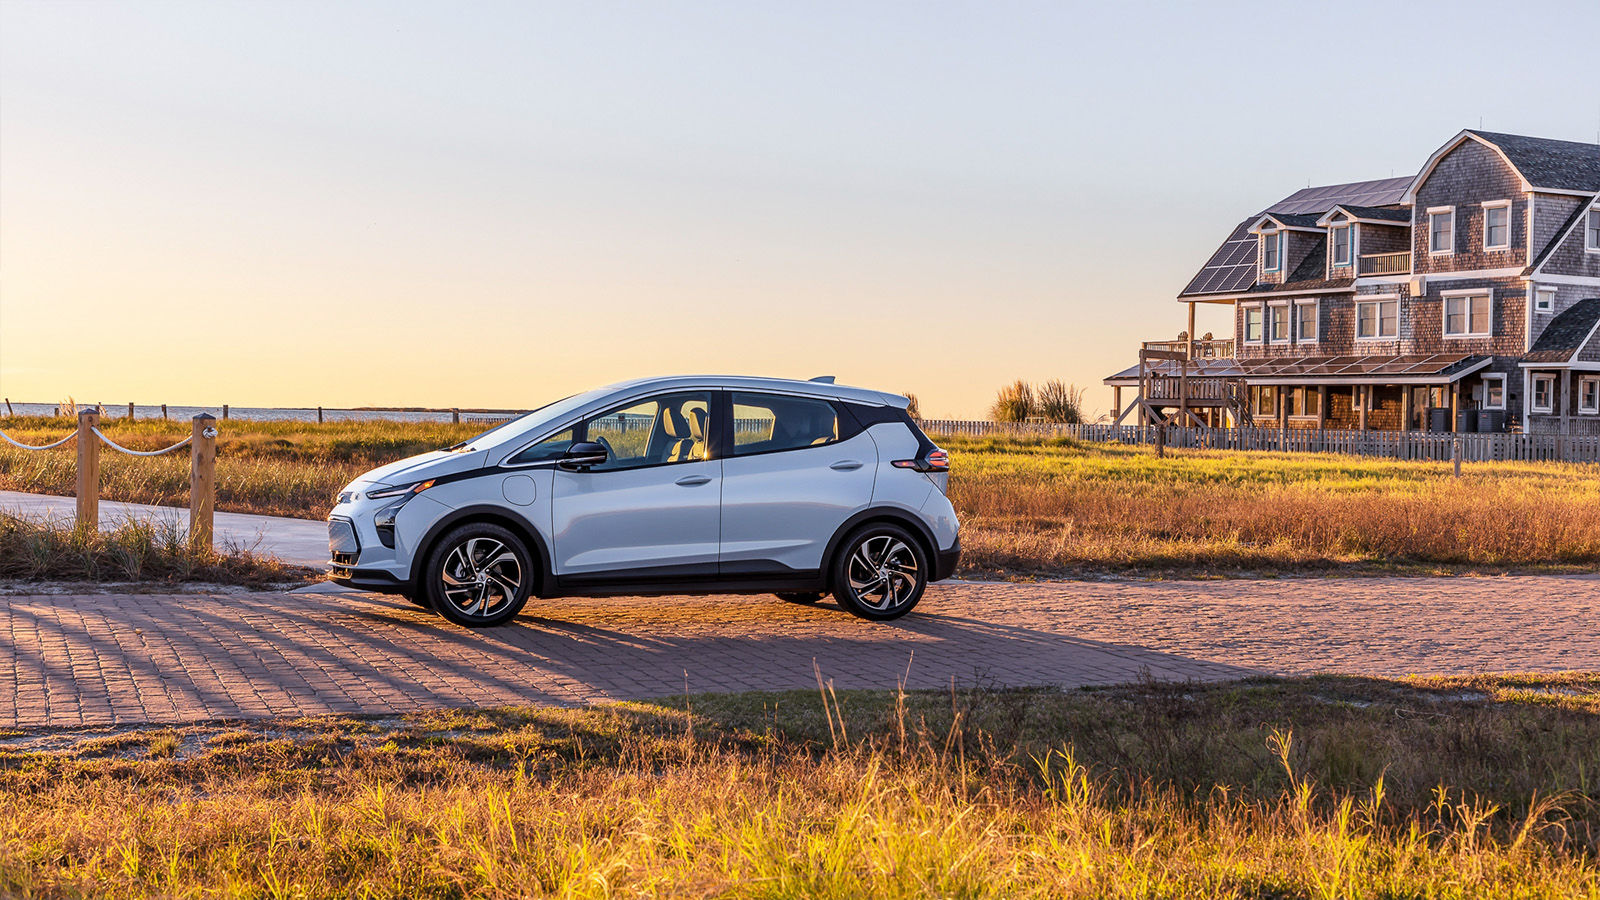 2023 chevrolet bolt ev electric white side view in a field montreal east with house